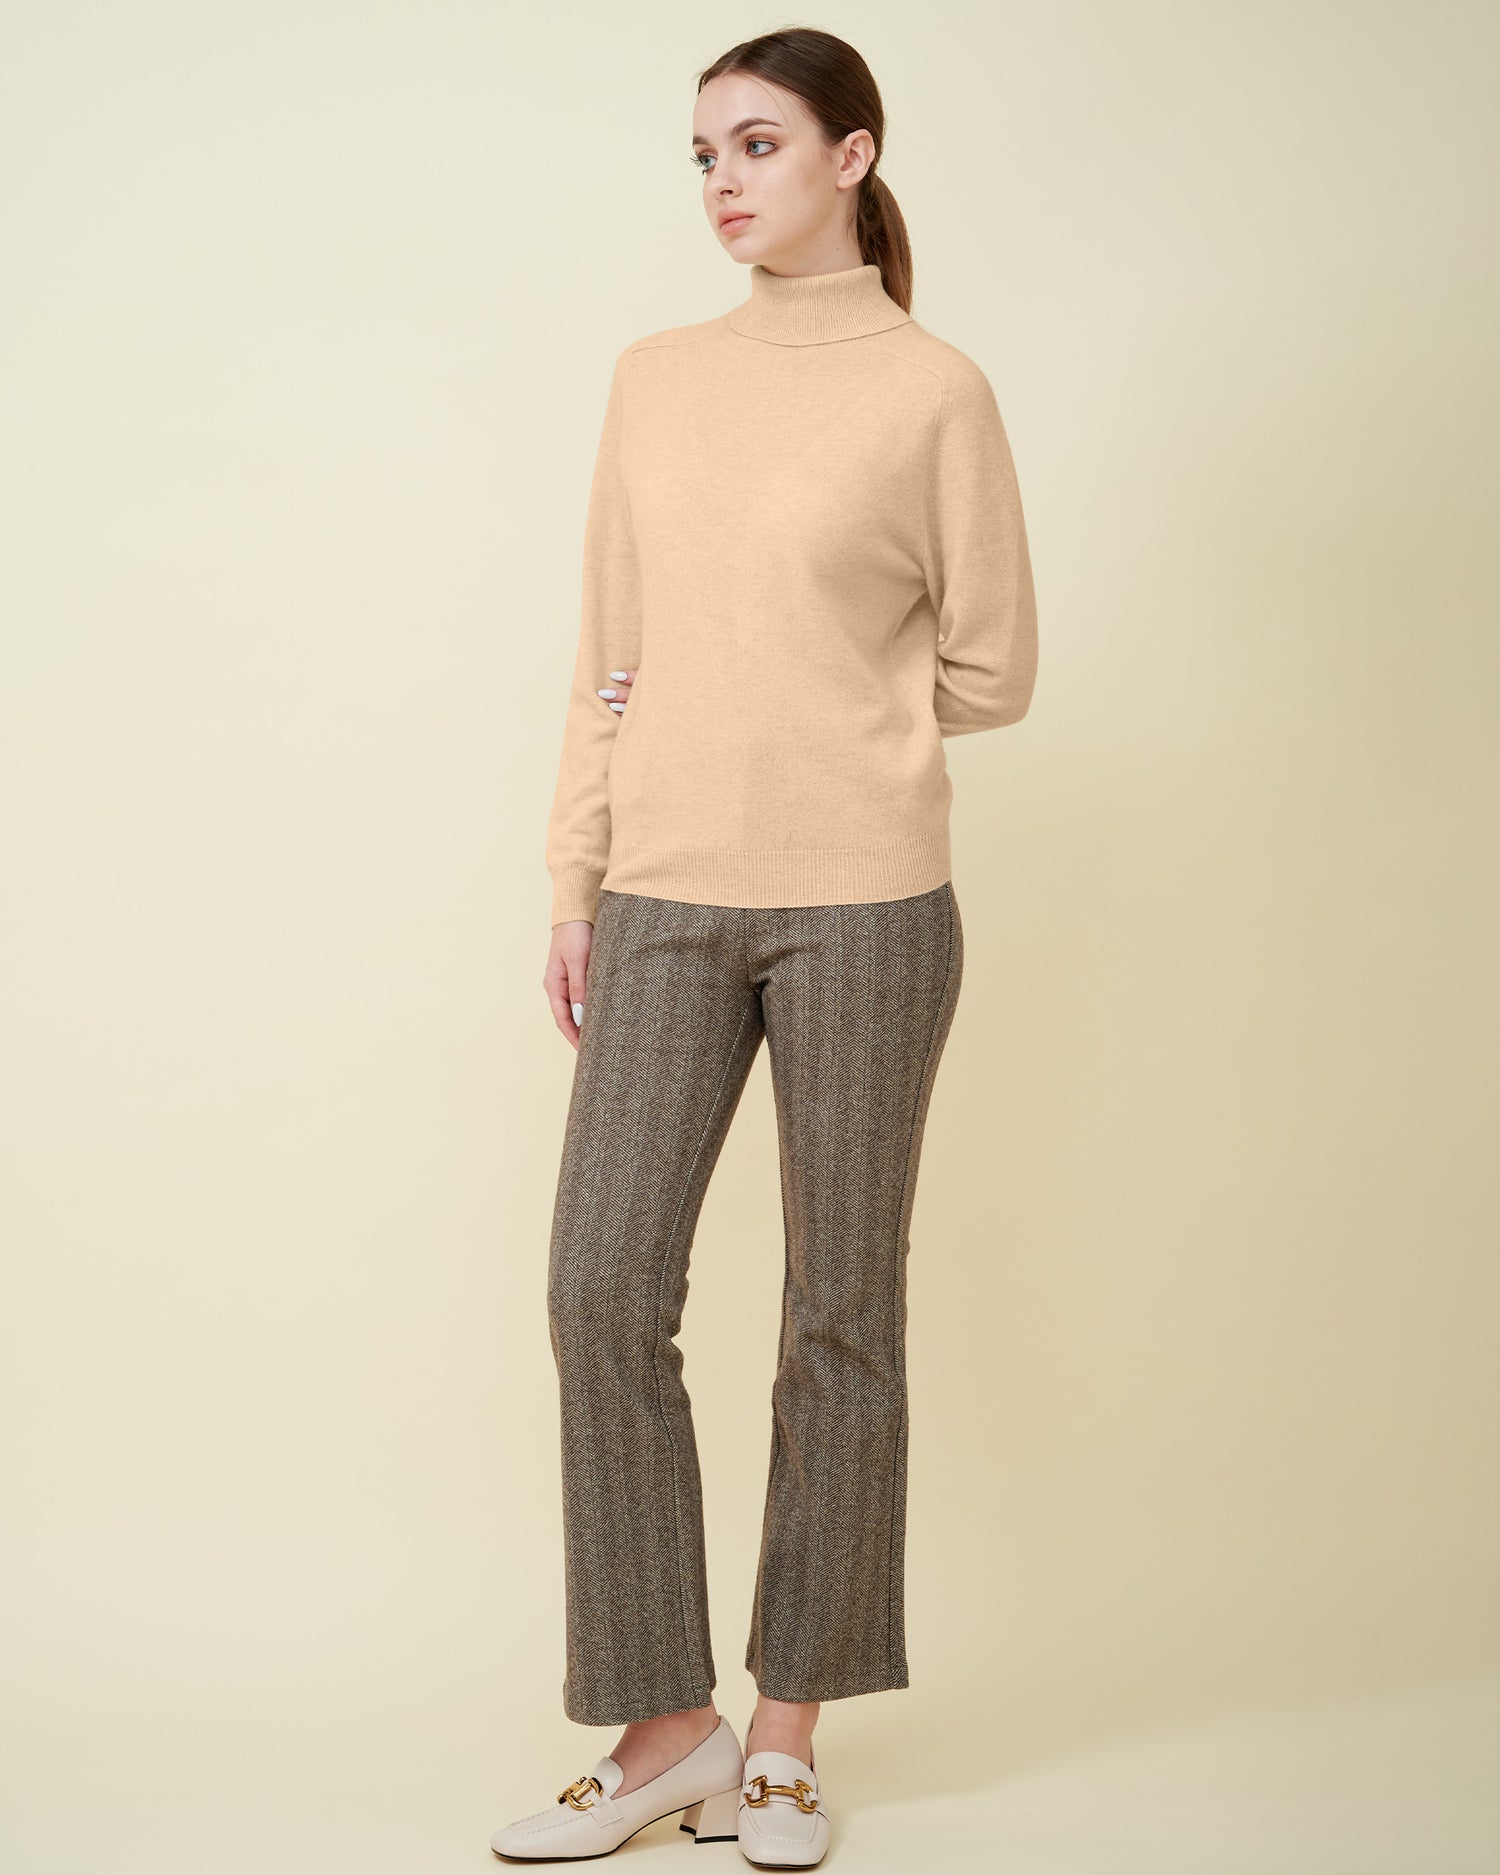 A front view finely knitted turtleneck sweater, Cashmere sweater , DAVINII , soft and comfy